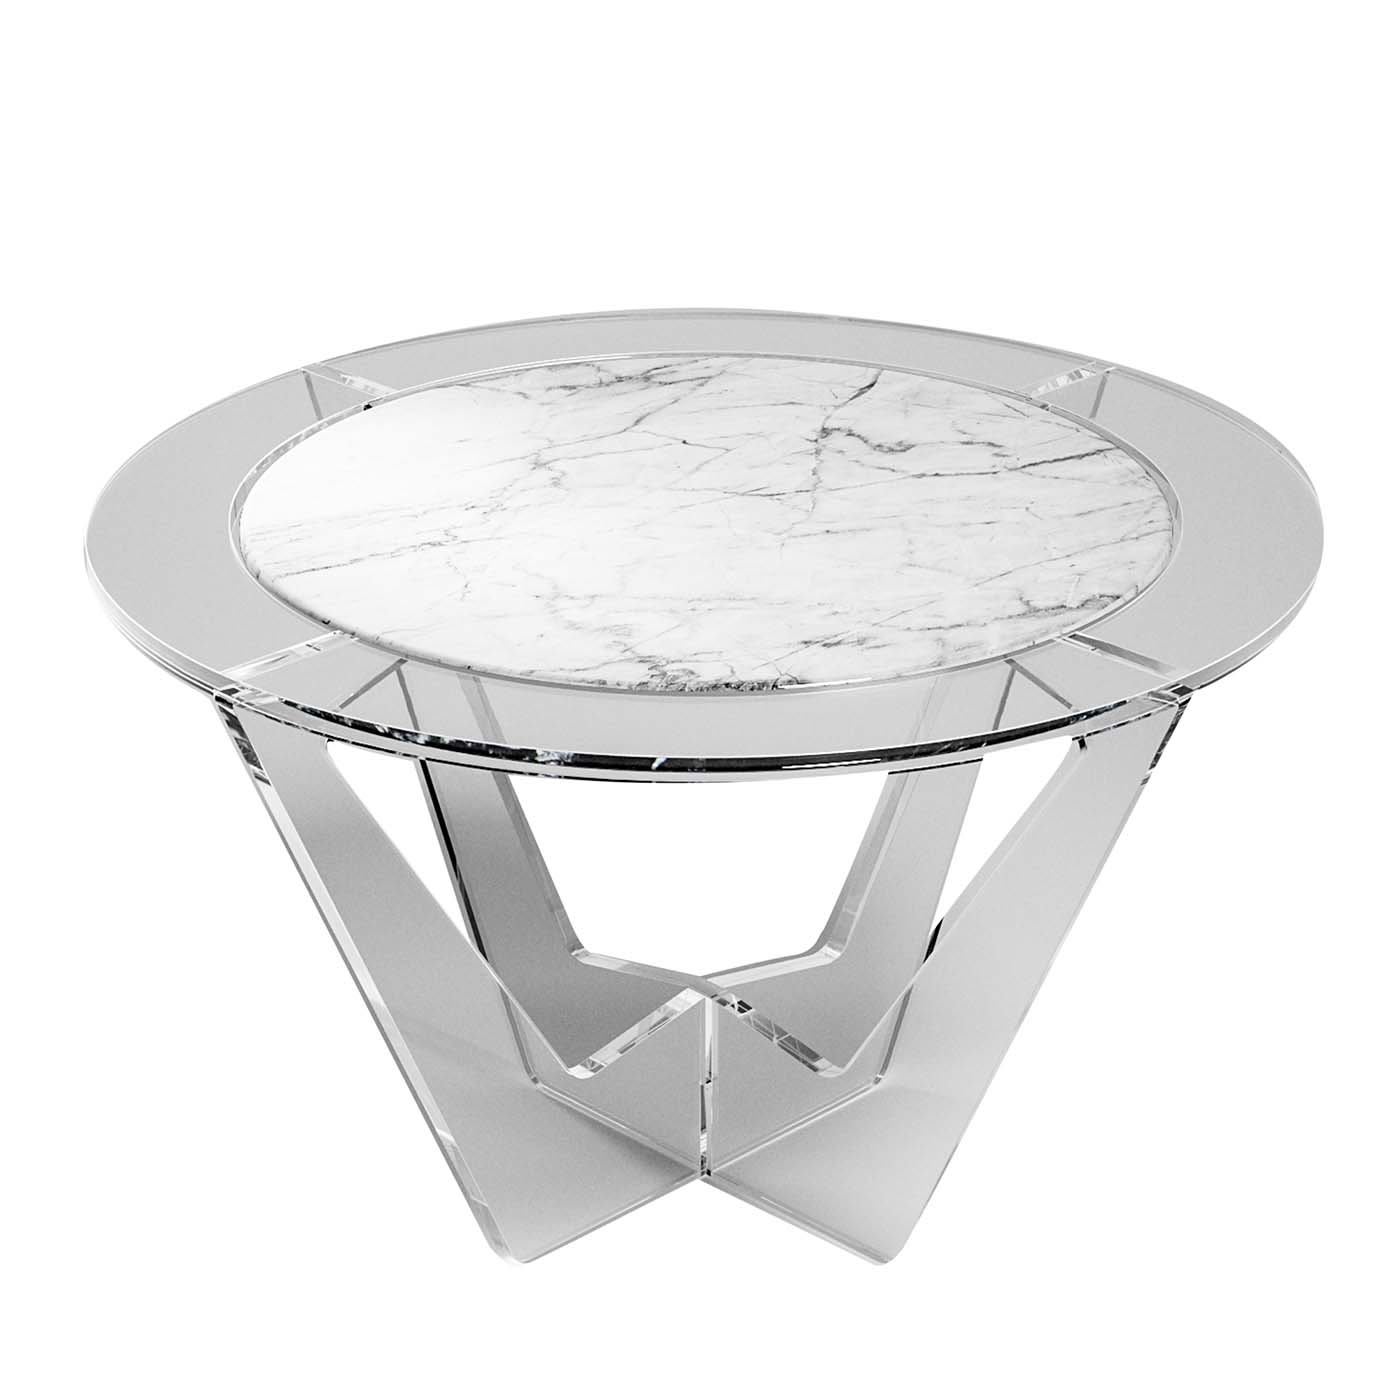 Hac Round Coffee Table with White Carrara Marble Top - Madea Milano